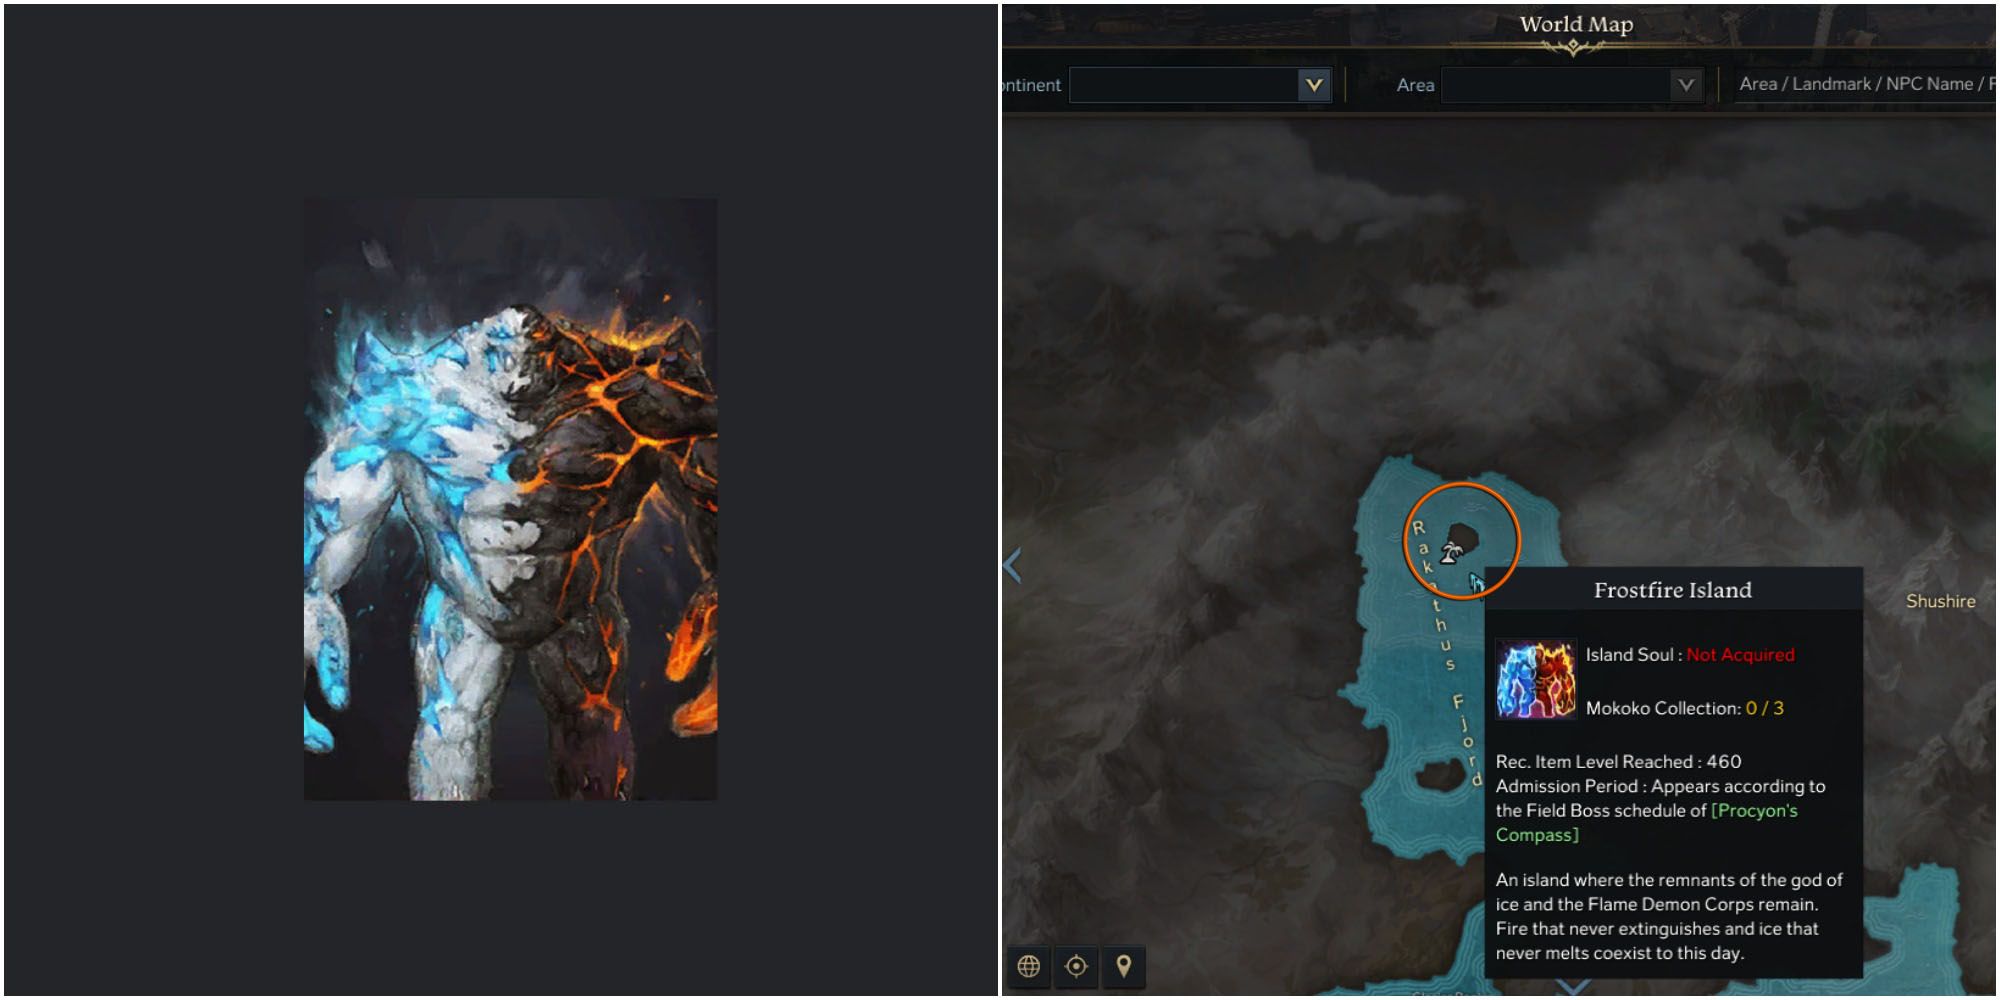 split image of Brealeos card and location of Frostfire island on a world map